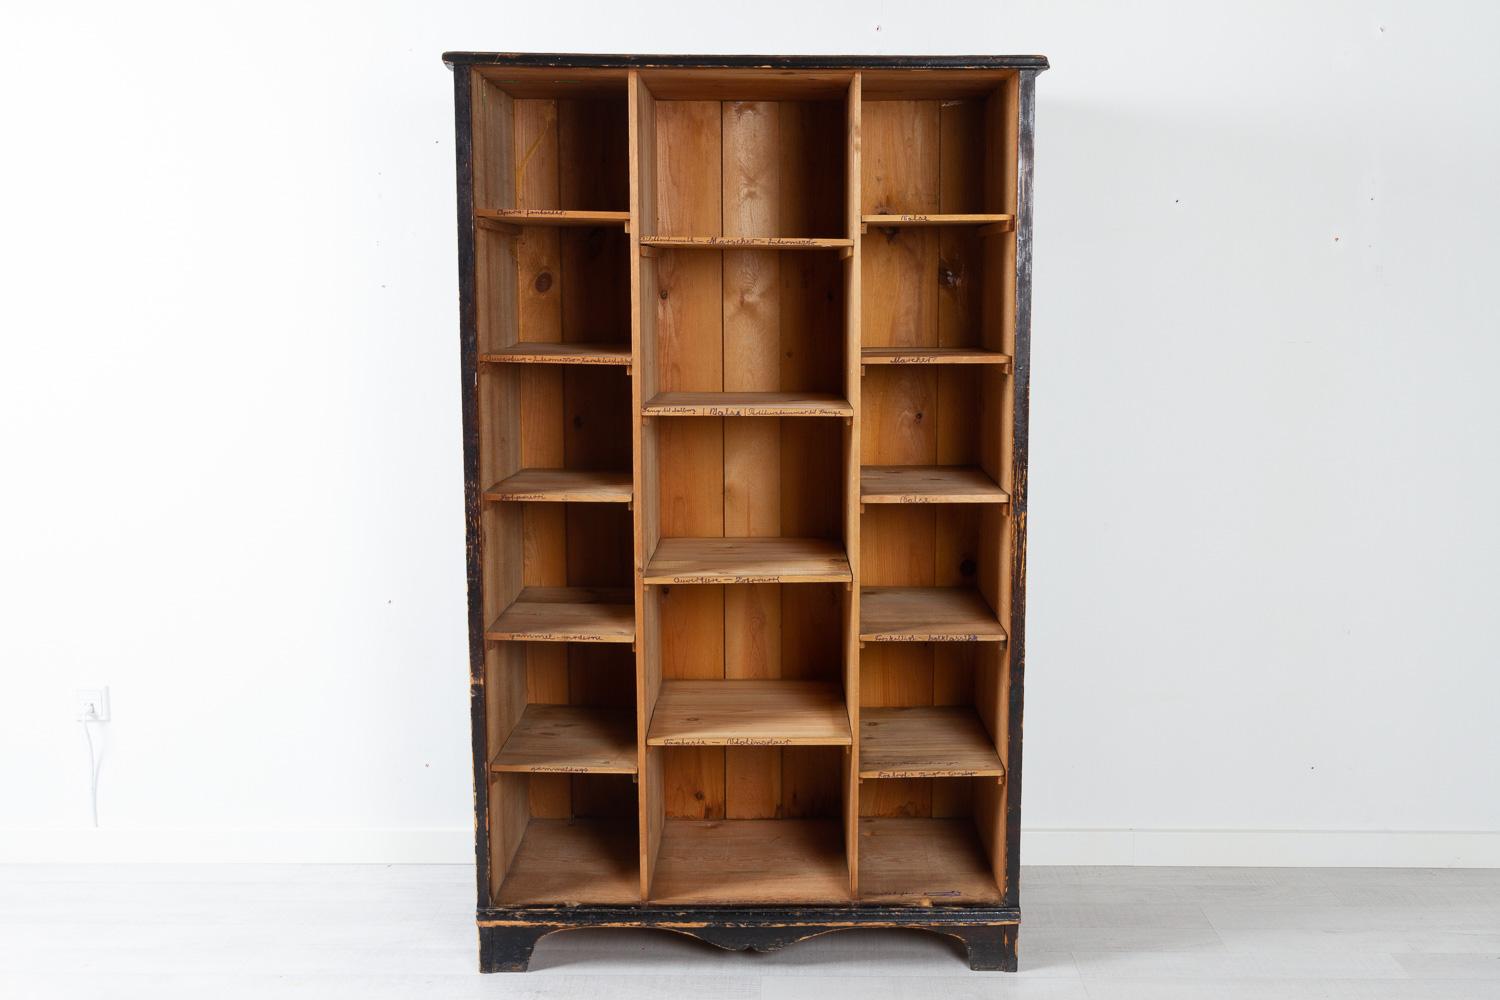 Antique Danish Black Closed Bookcase, ca. 1910.
Vintage ebonized bookcase or cupboard made in Denmark in the early 1900s. Rustic and charming cabinet with front that easily lifts off. Front has a lock and key. The inside is divided in many shelves